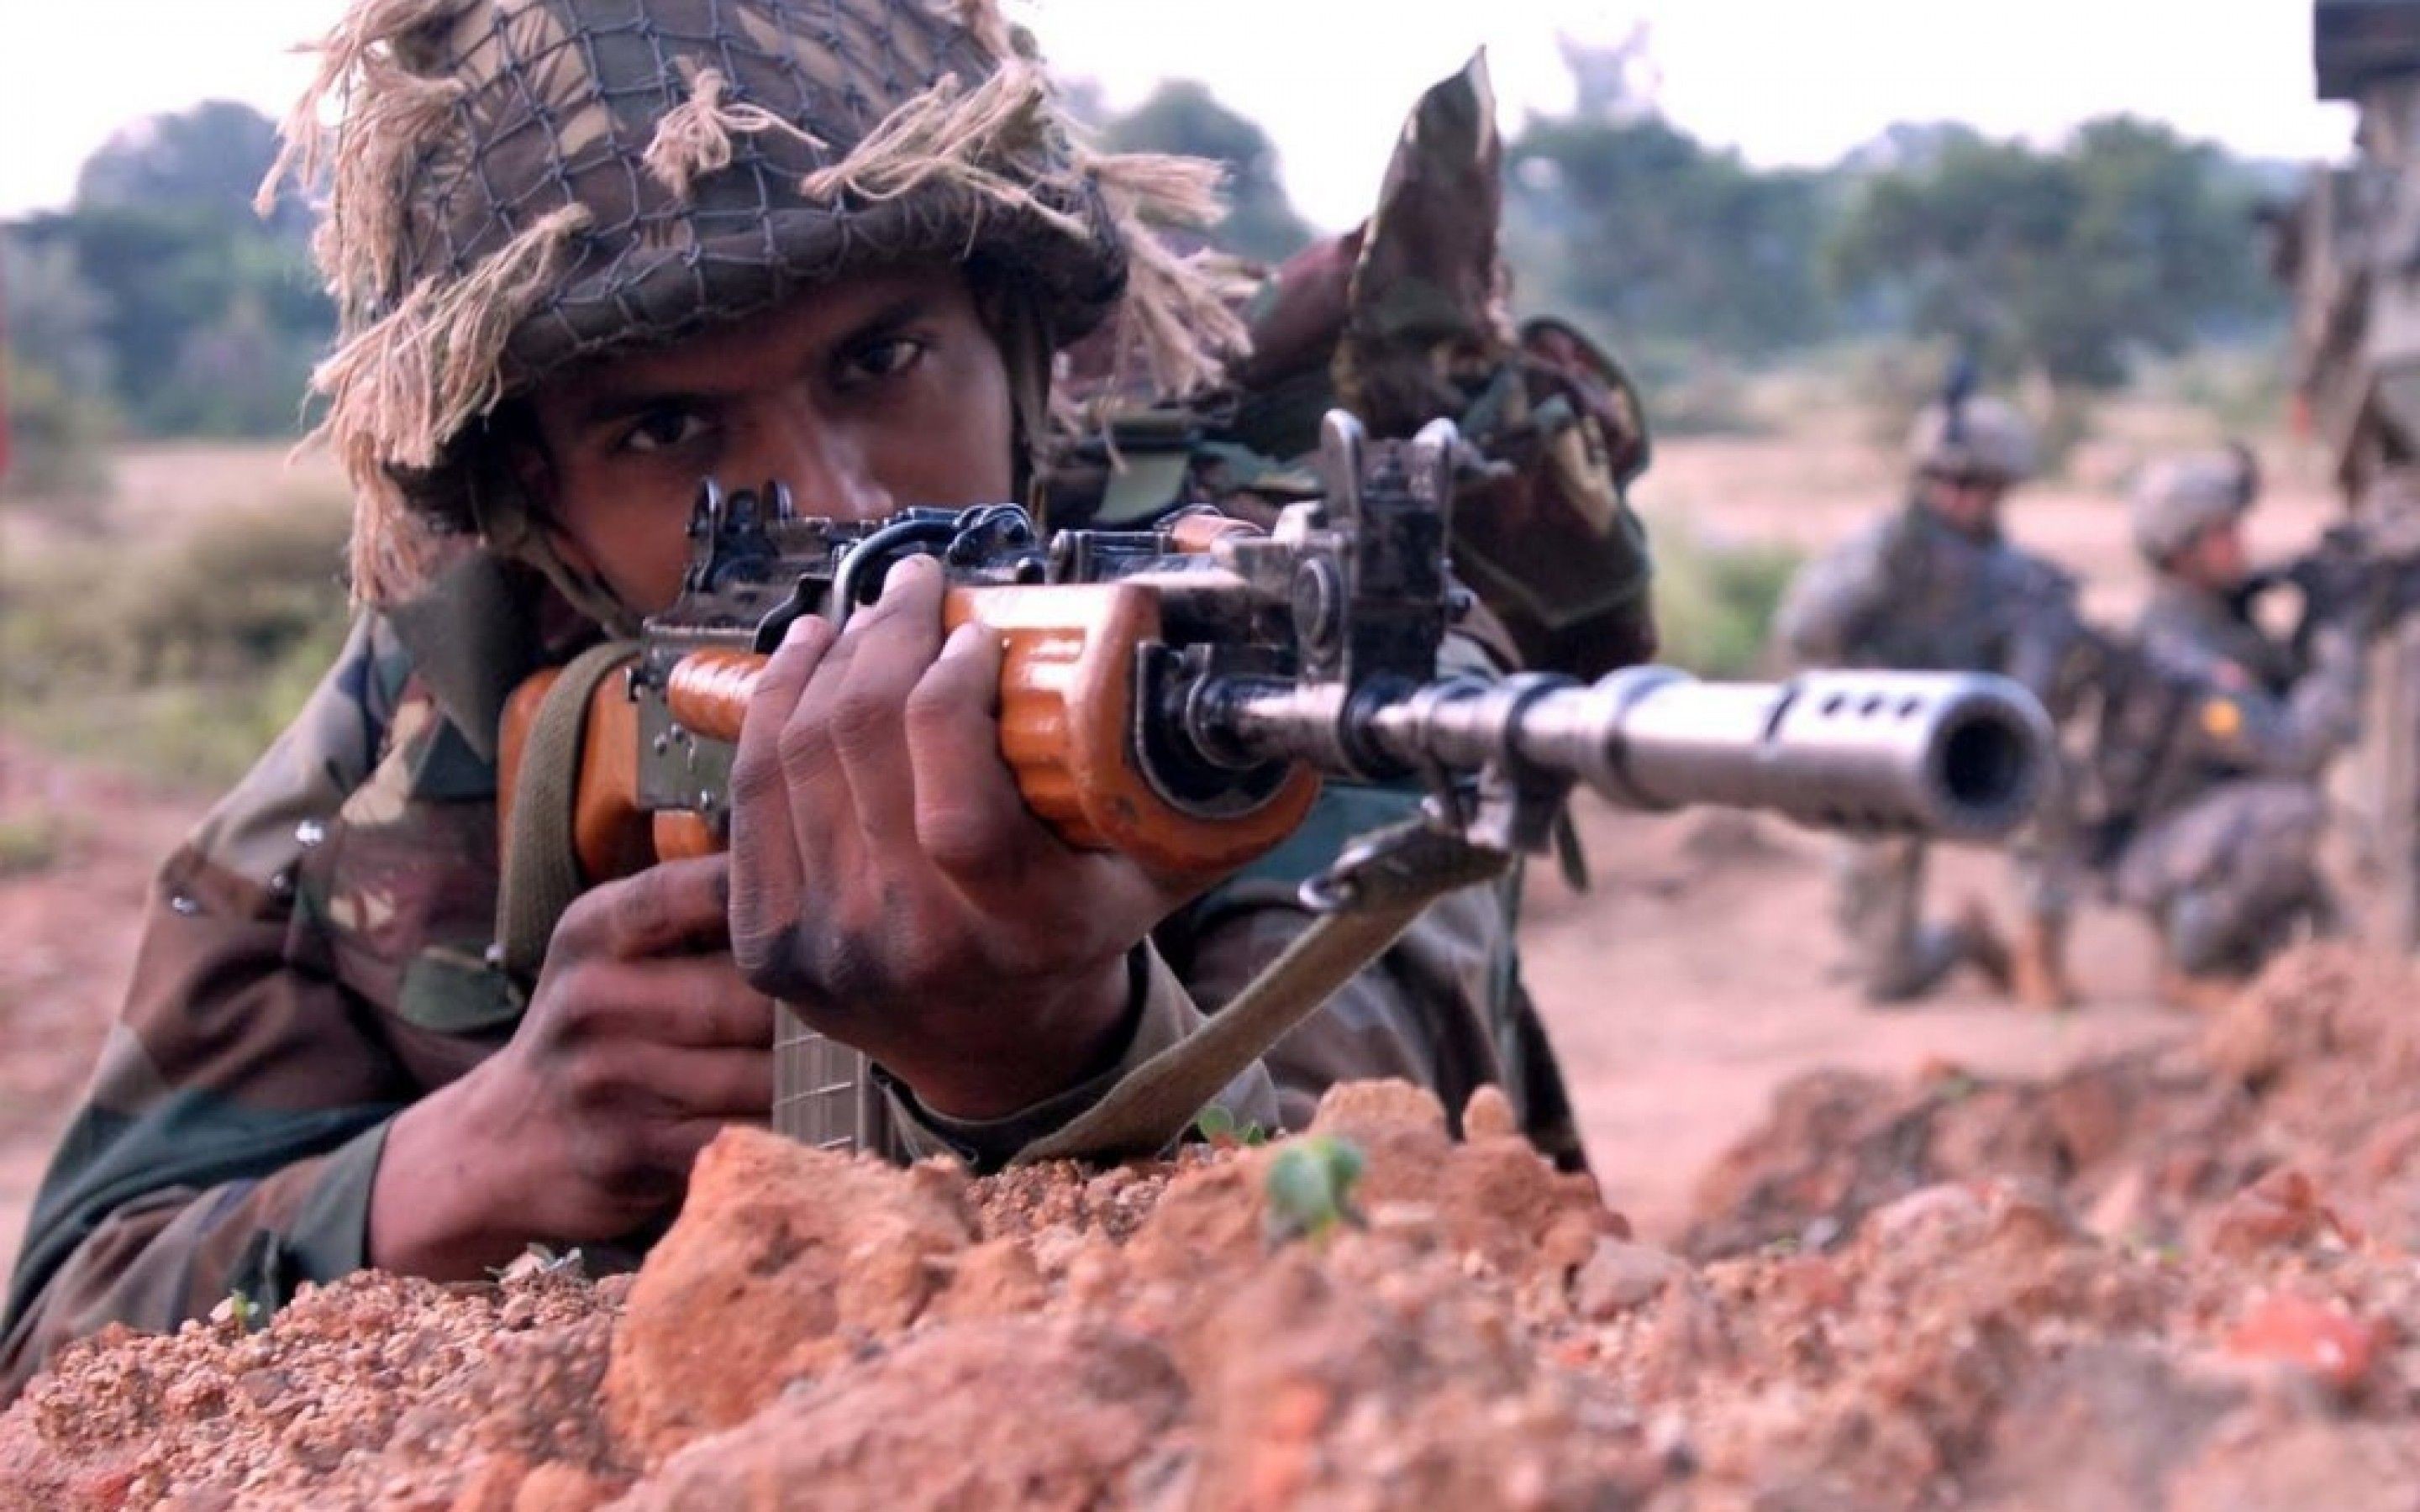 2880x1800 Indian Army HD Wallpaper - HDWallpapersin.com | HD Wallpapers for .